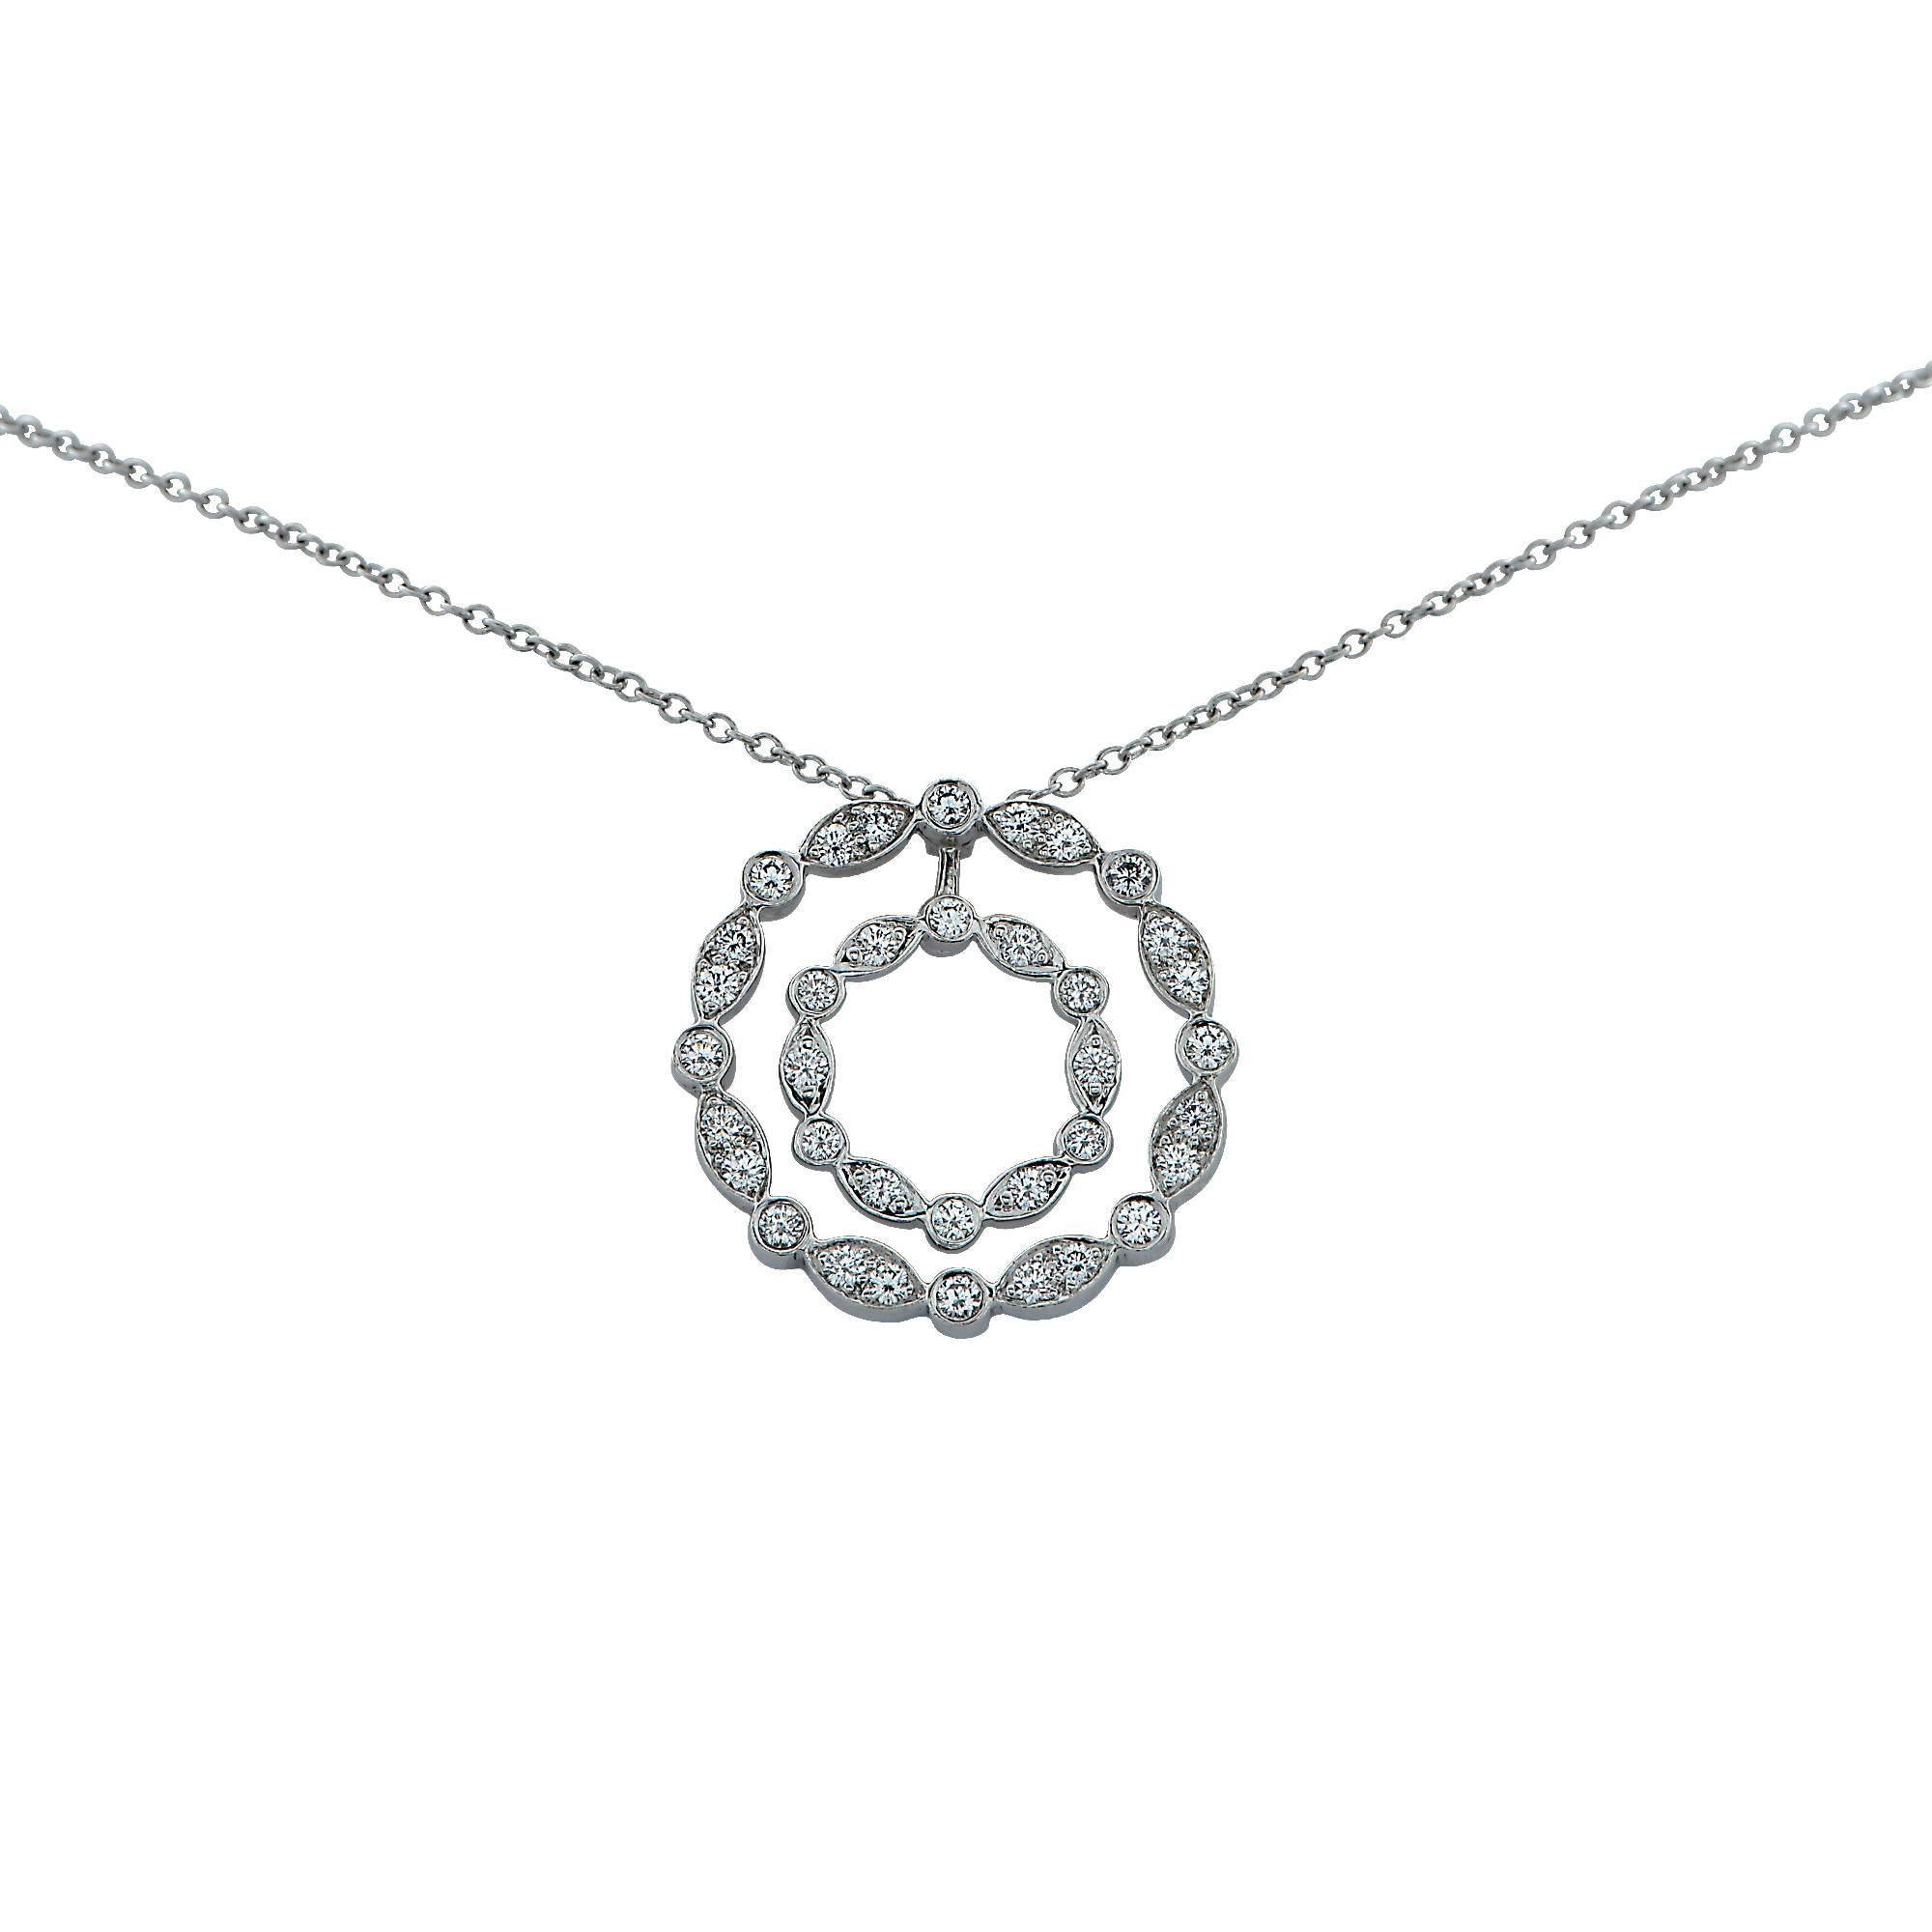 tiffany double ring necklace